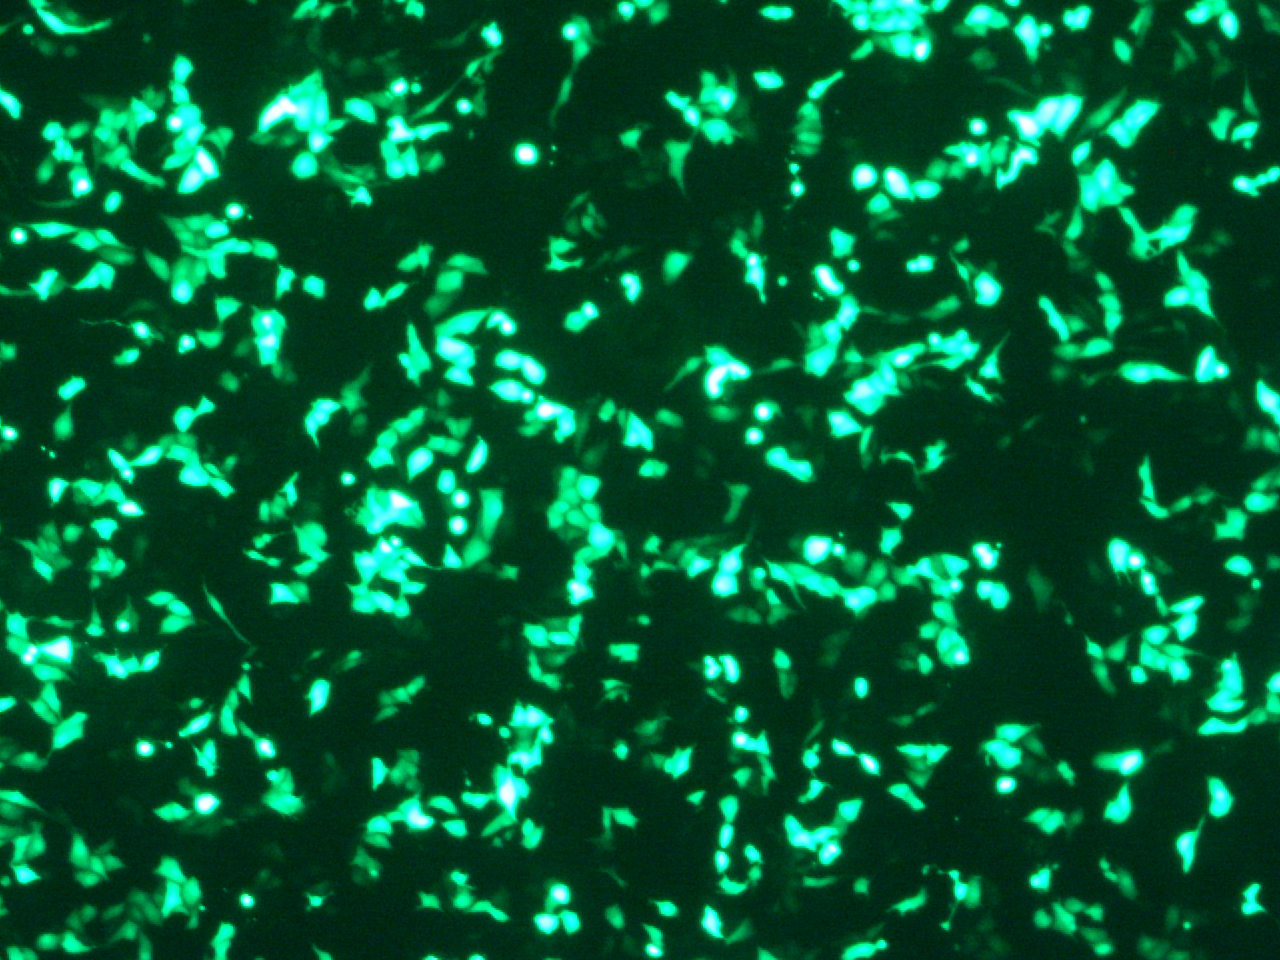 Vero cells transfection with VeroFect reagent